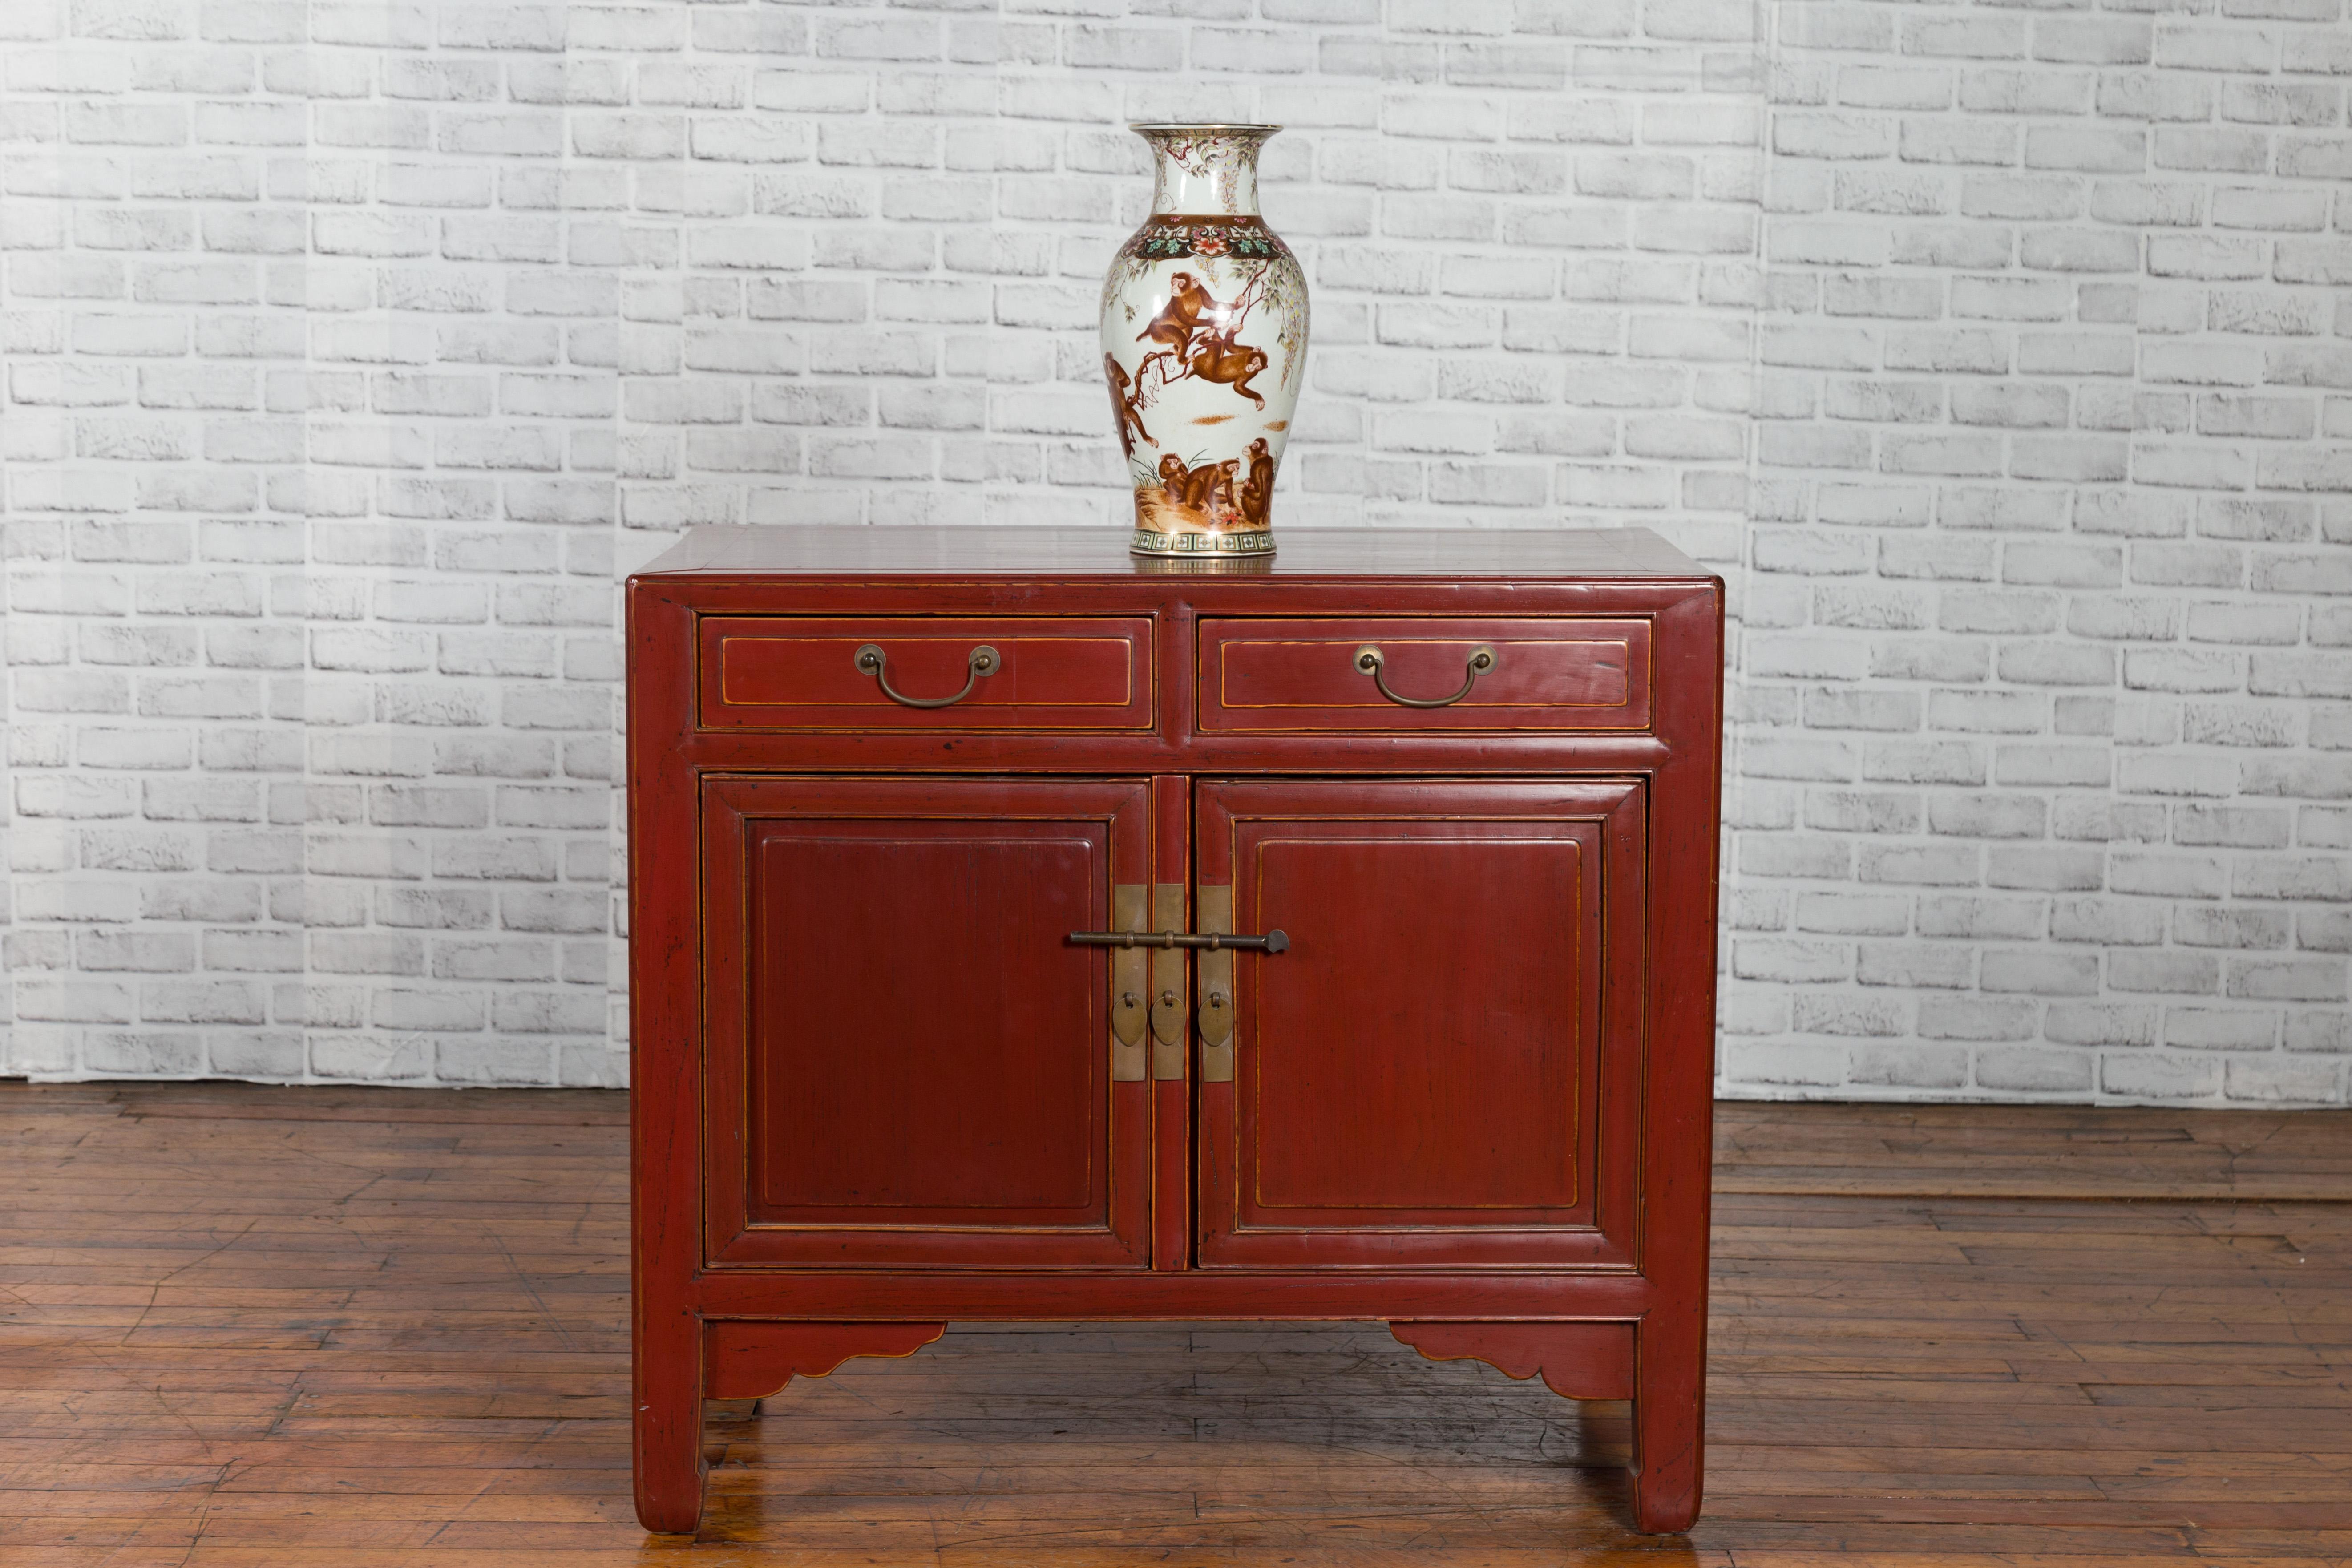 Chinese Red Lacquered 19th Century Qing Dynasty Elm Cabinet with Drawers and Doors